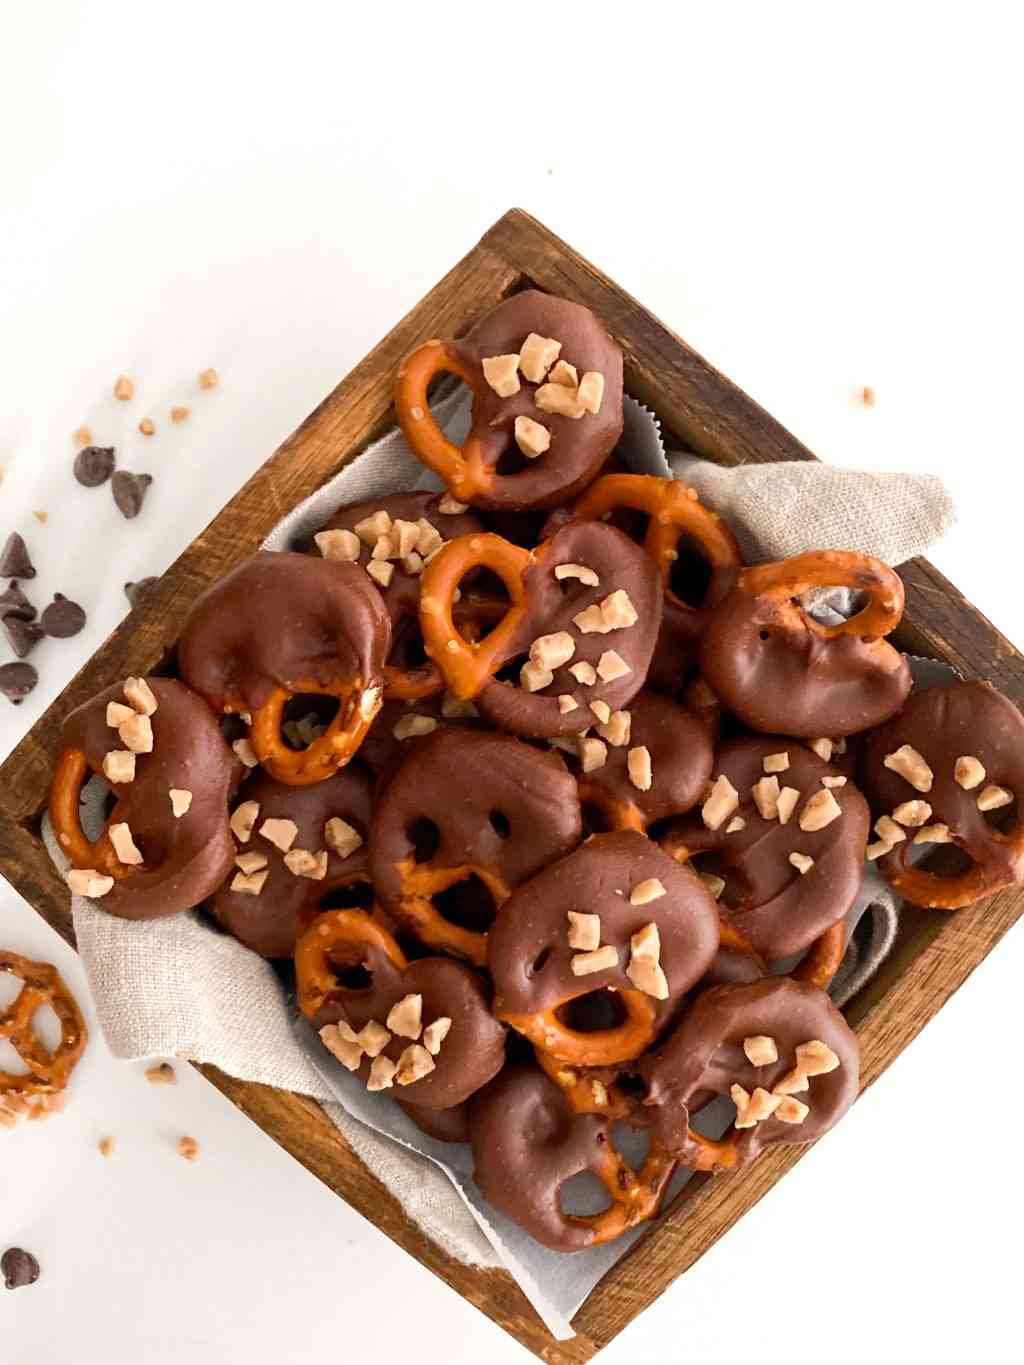 Easy Peanut Butter and Chocolate Dipped Pretzels